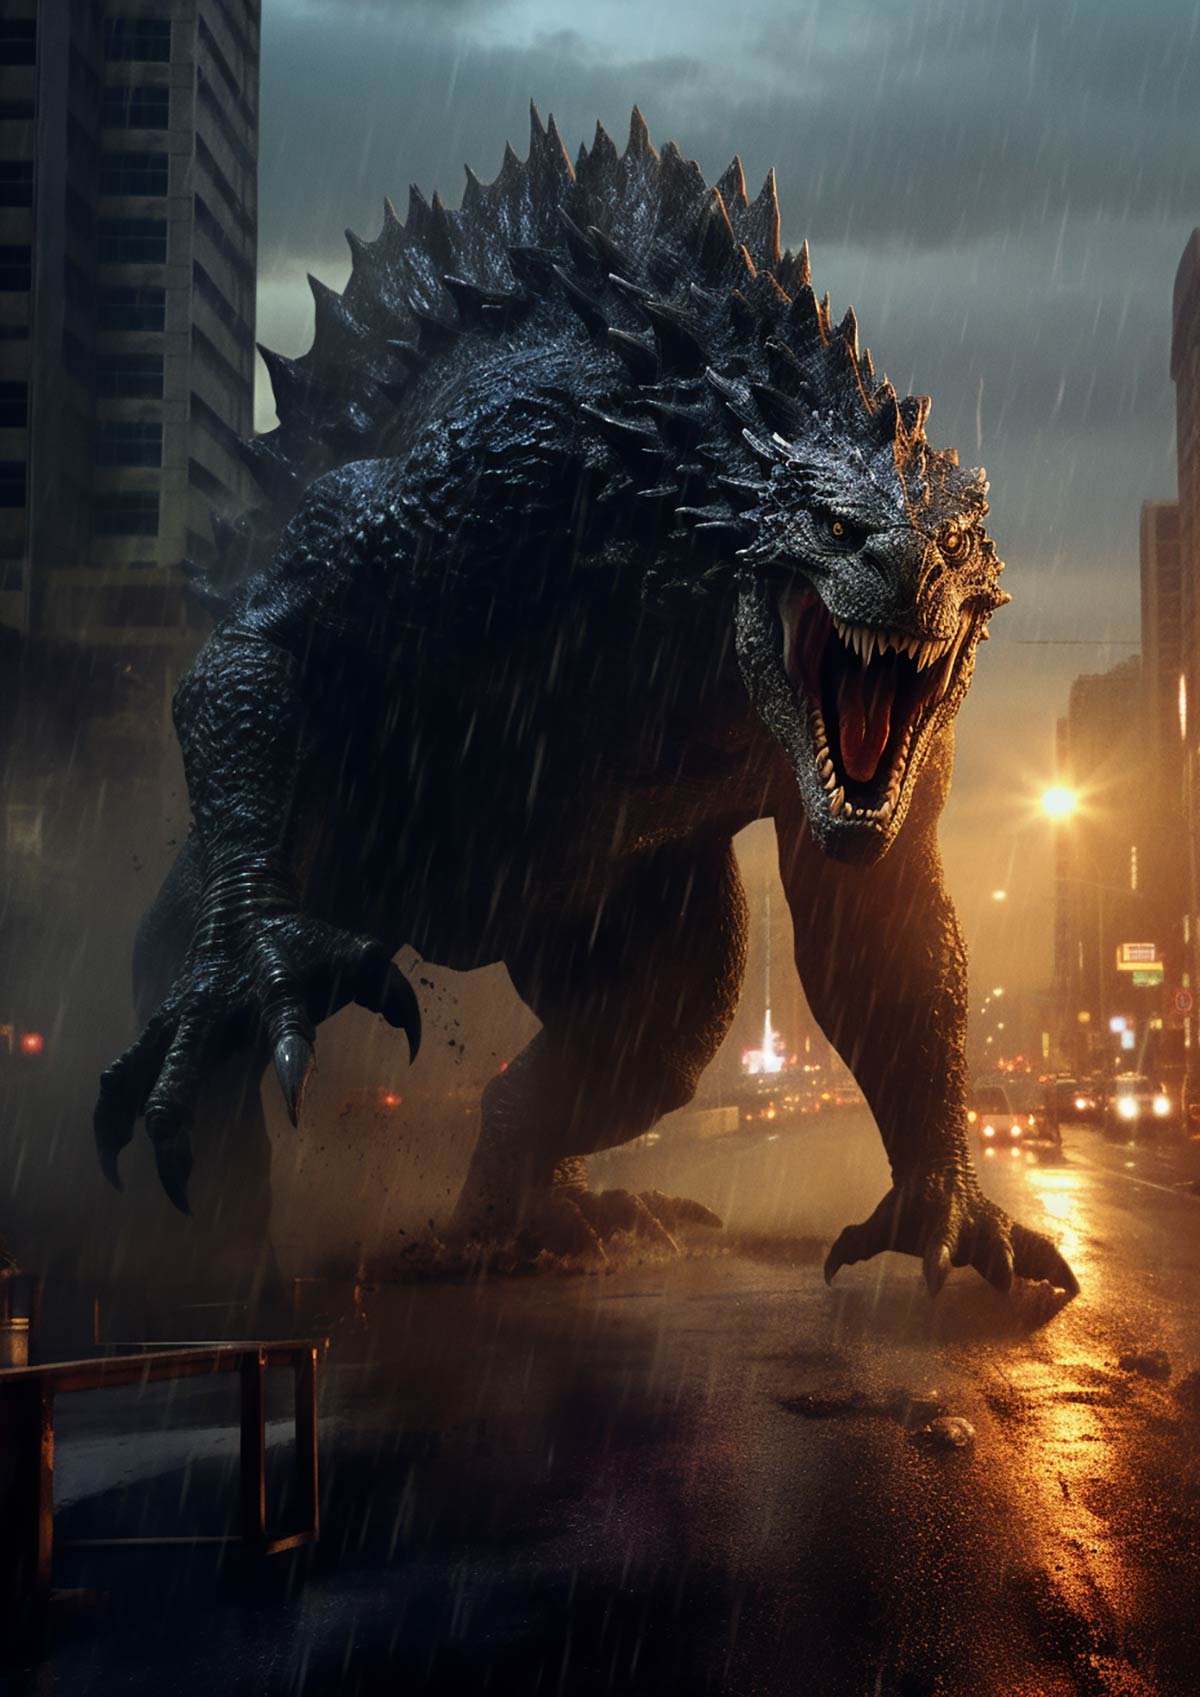 Godzilla in the streets of a city created with the AI Tool Midjourney